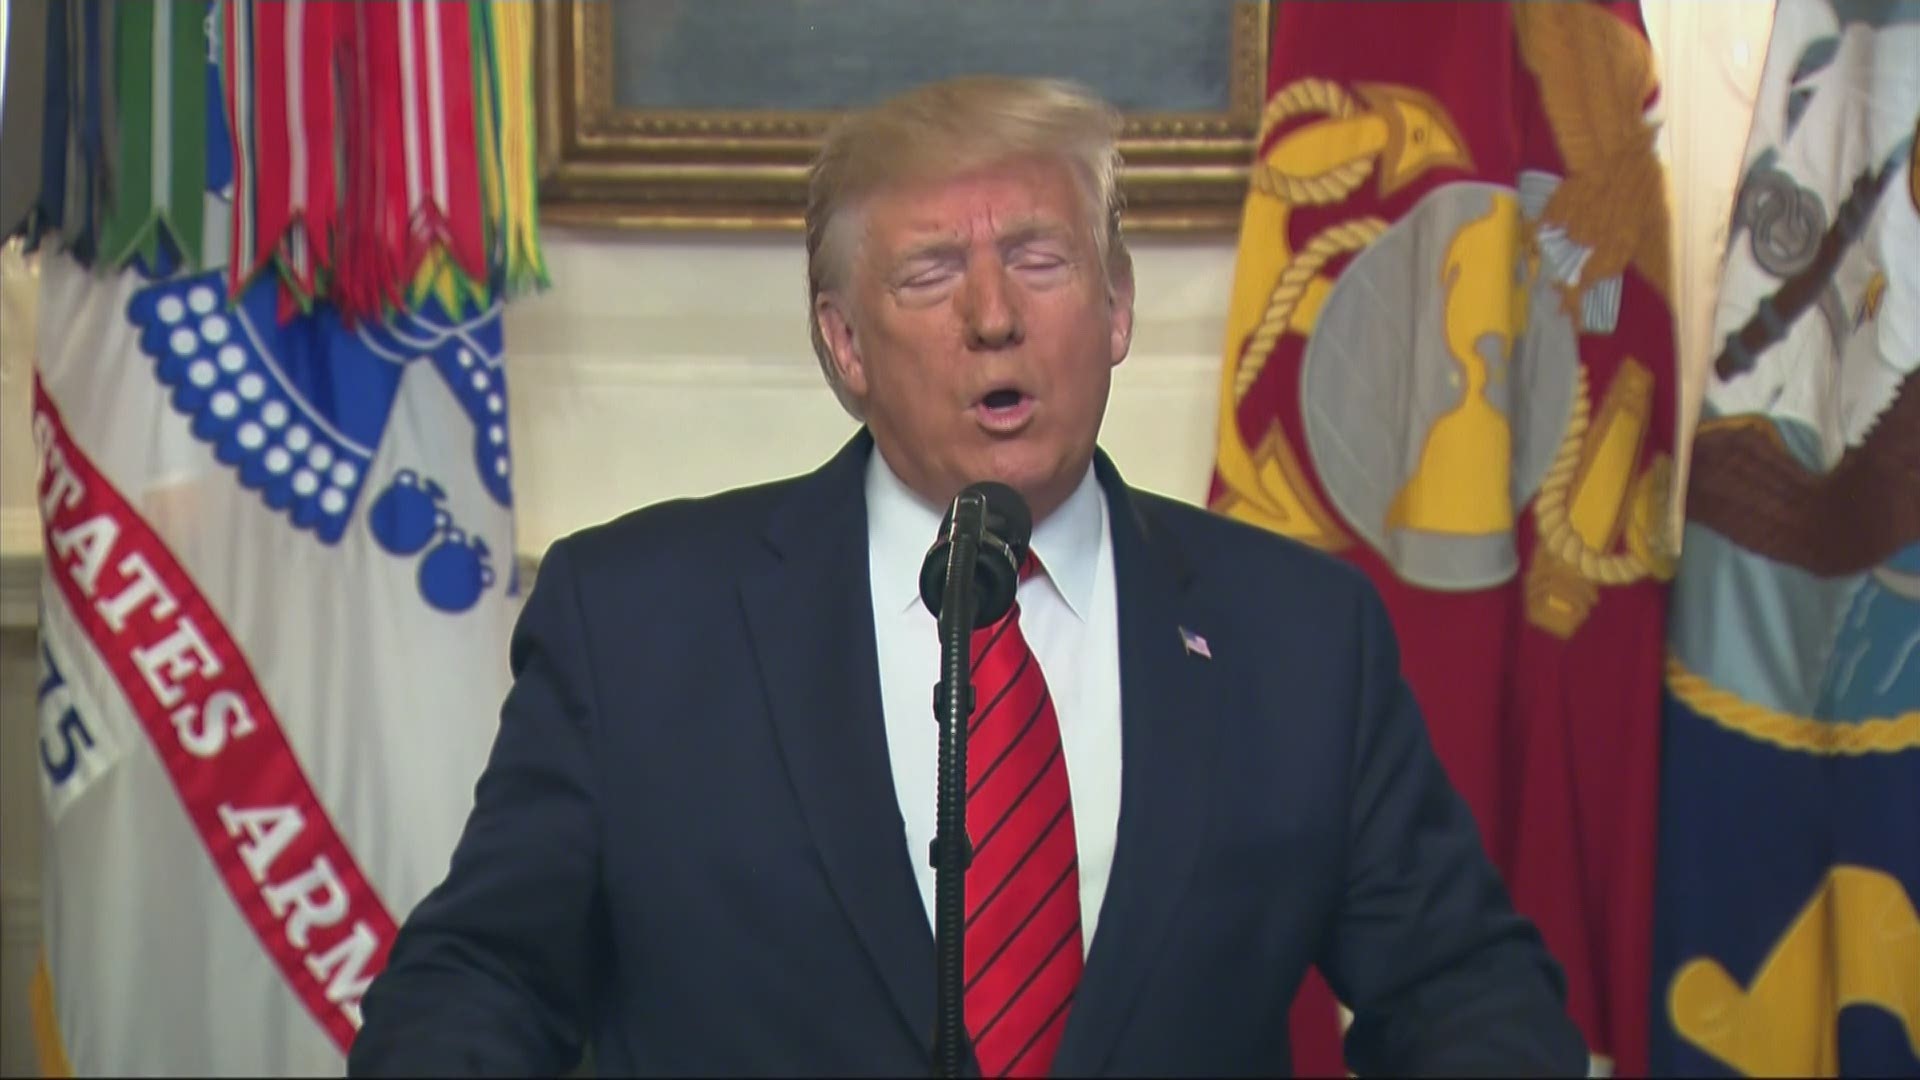 Trump said in an address to the nation from the White House's Diplomatic Room that "al-Baghdadi is dead" - fulfilling the top national security priority of his admin